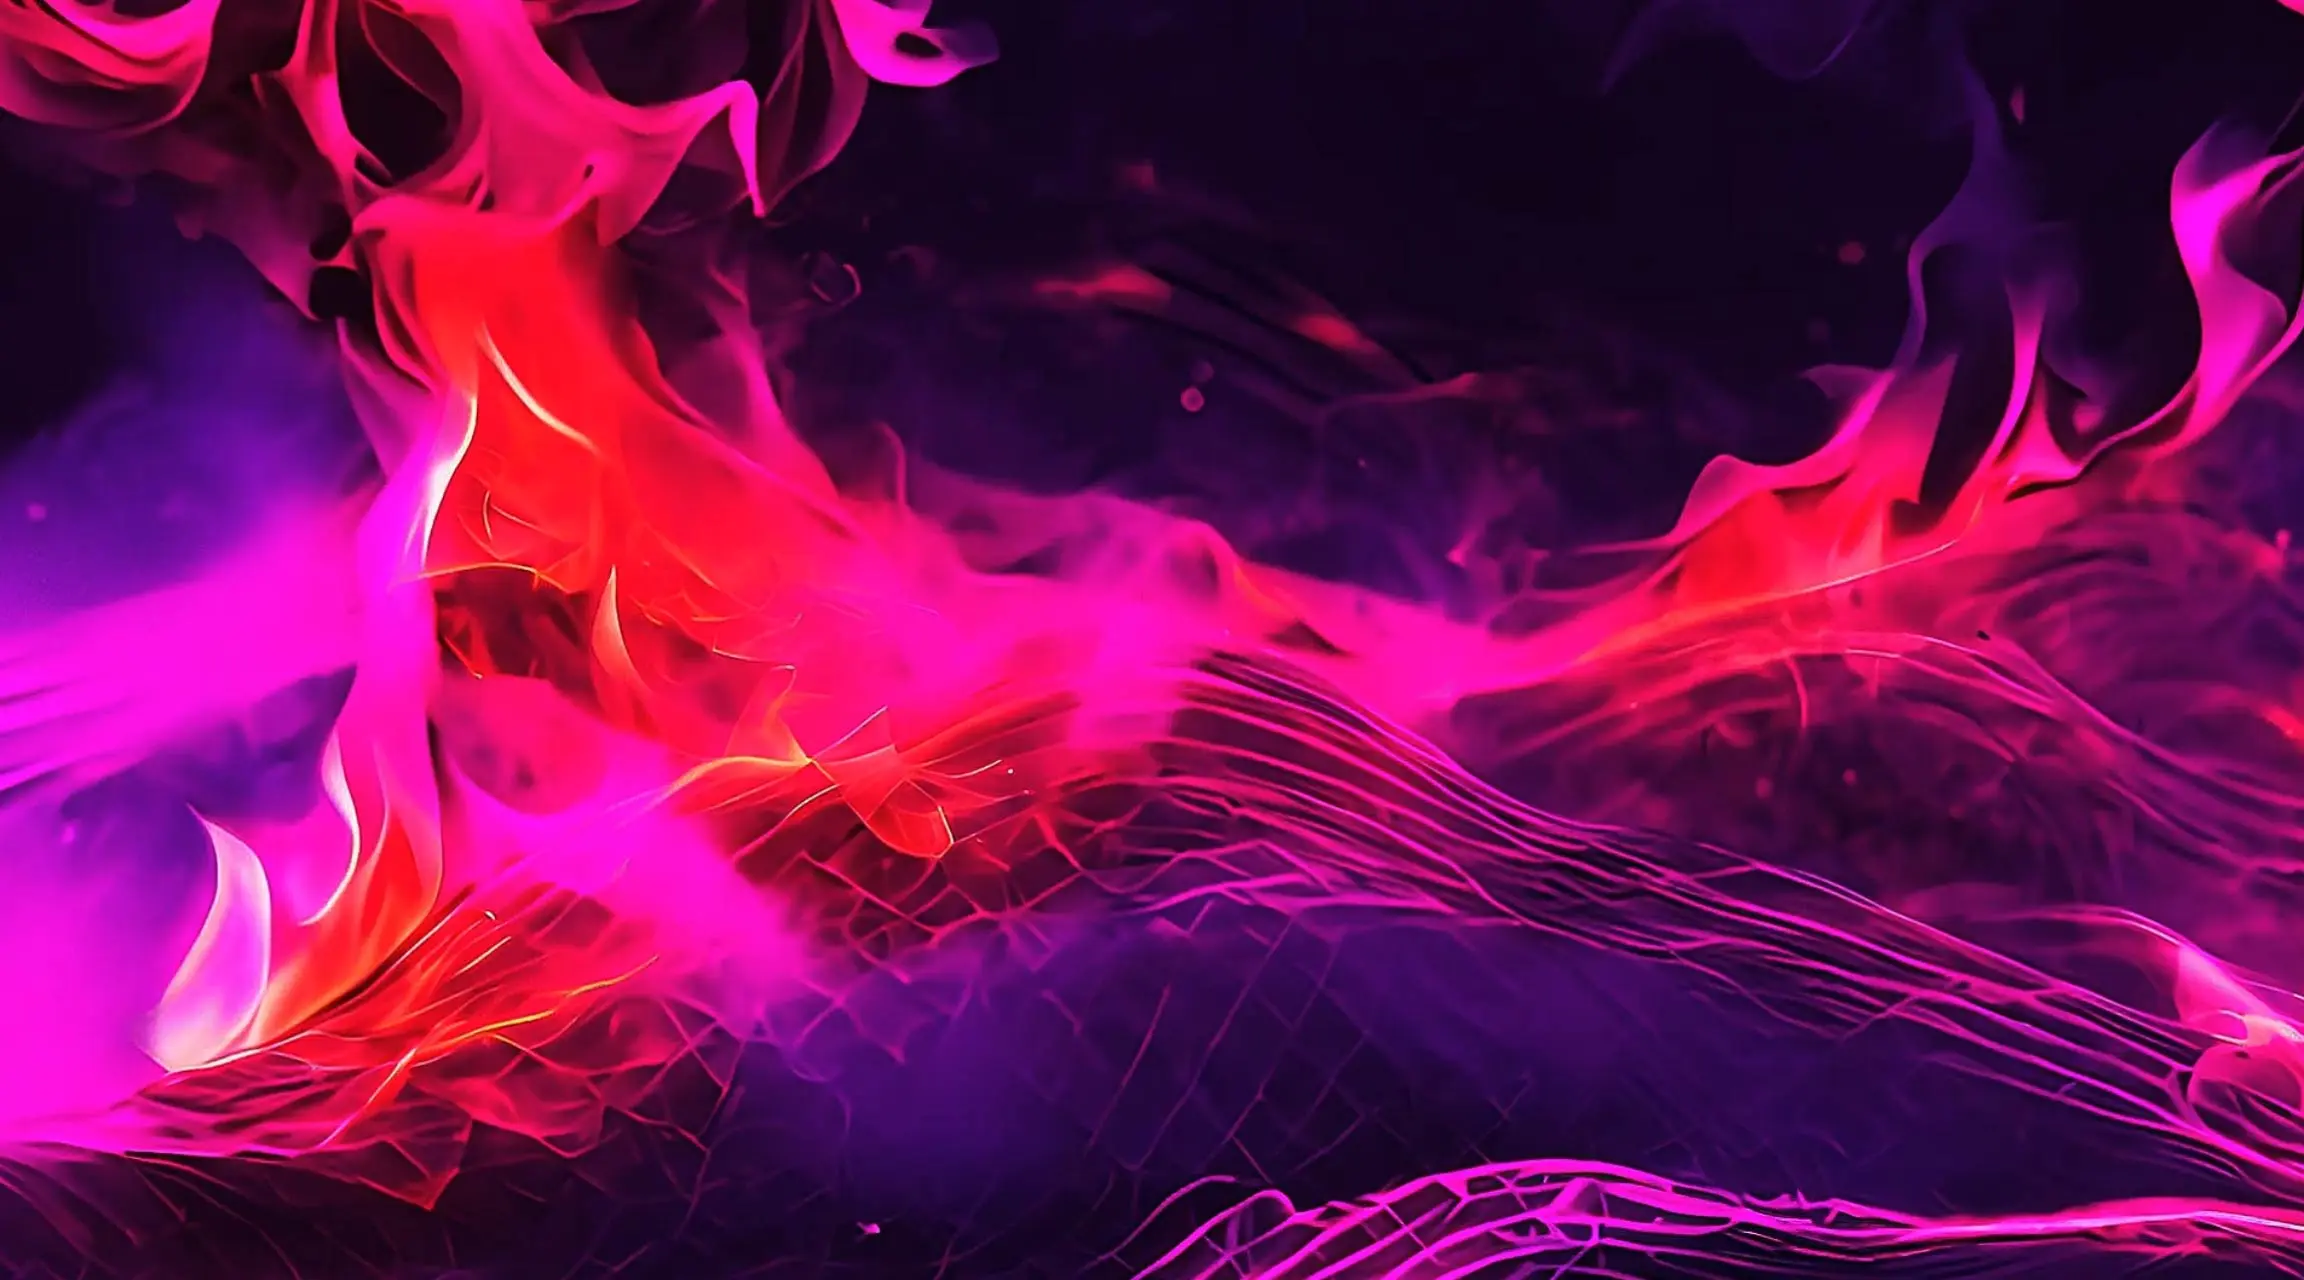 Neon Pink and Red Flowing Abstract Creative Design